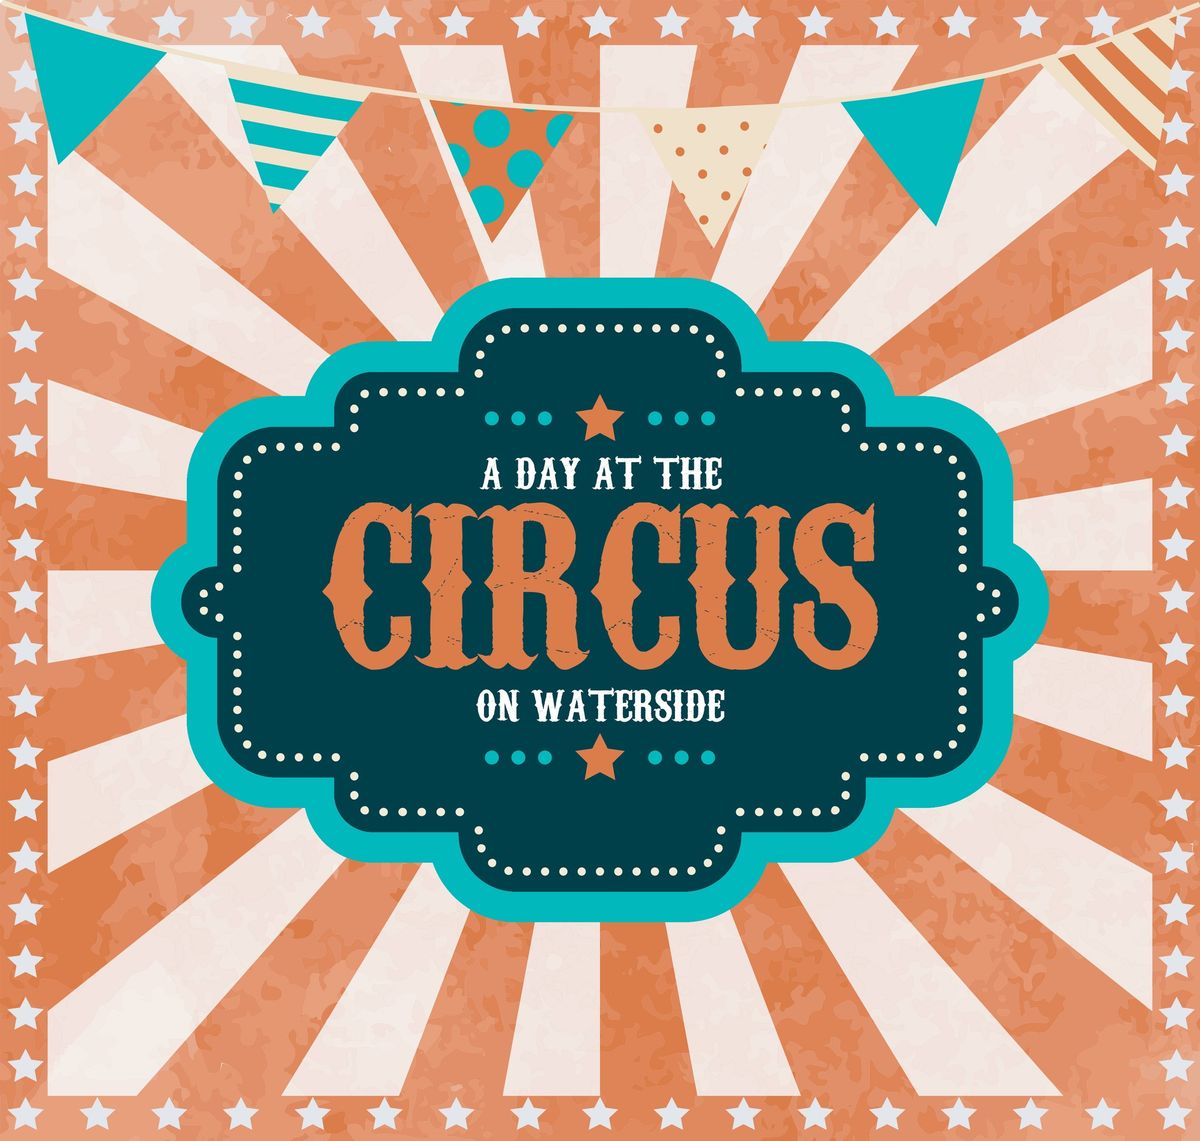 A Day at the Circus on Waterside